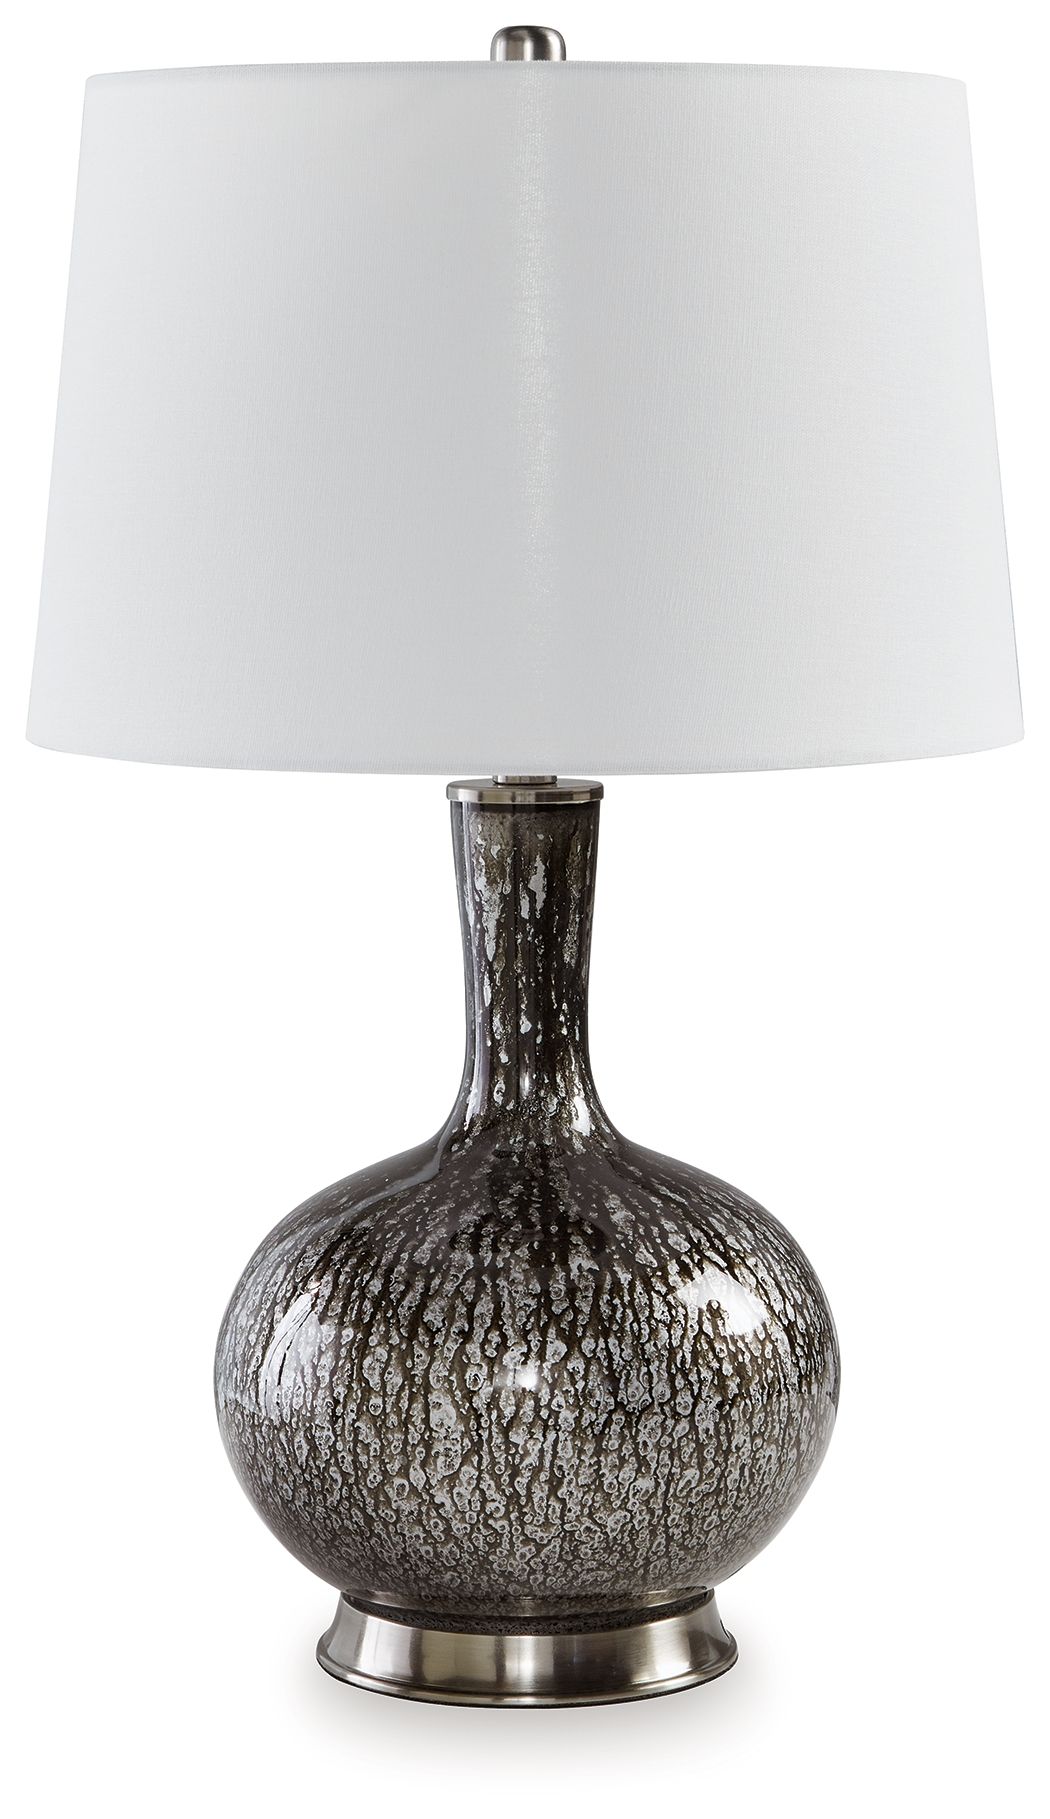 Tenslow - Antique Black - Glass Table Lamp Tony's Home Furnishings Furniture. Beds. Dressers. Sofas.